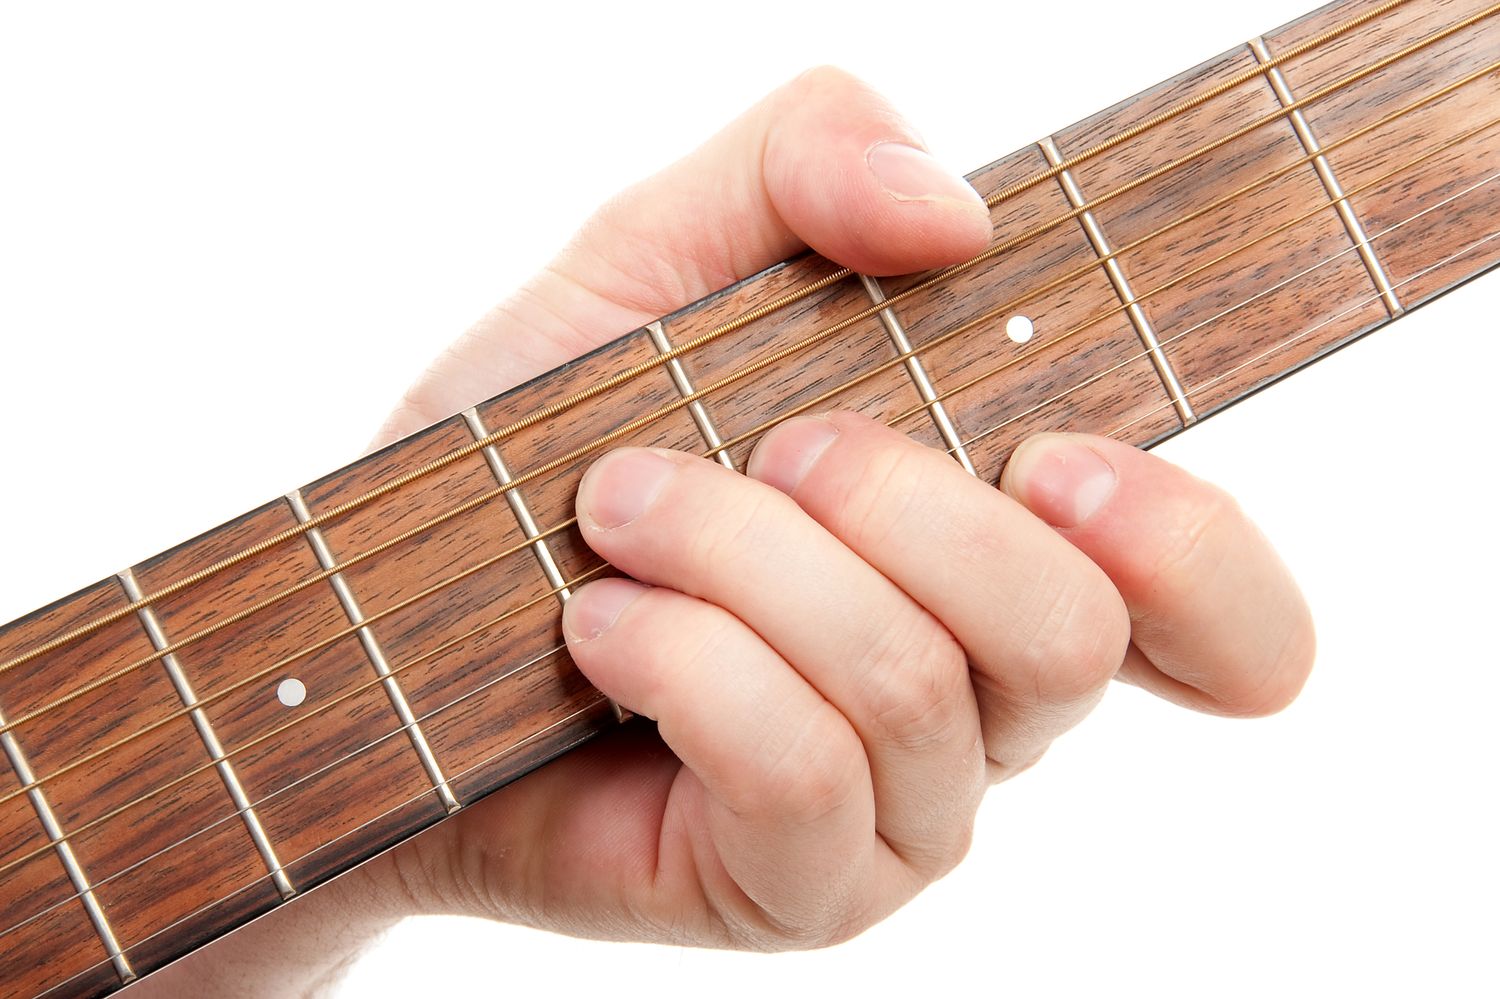 What Are The 5 Basic Guitar Chords